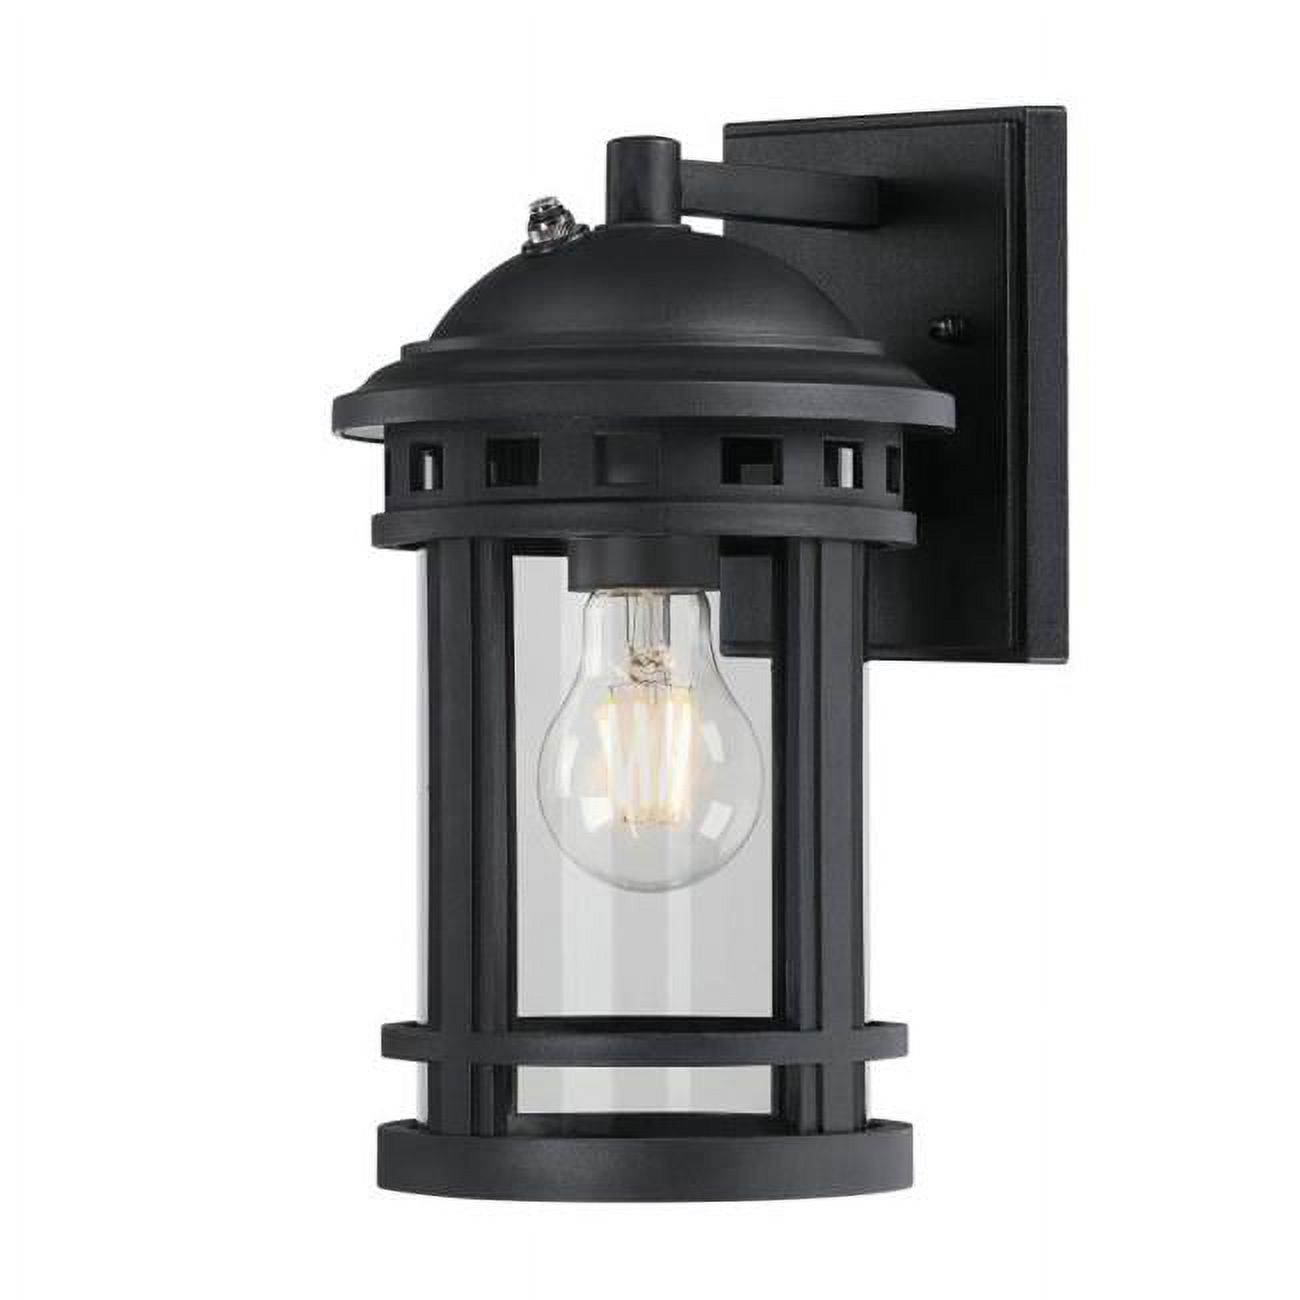 Westinghouse Lighting 6123200 Belon Outdoor Wall Fixture with Dusk to Dawn Sensor, Black - image 1 of 5